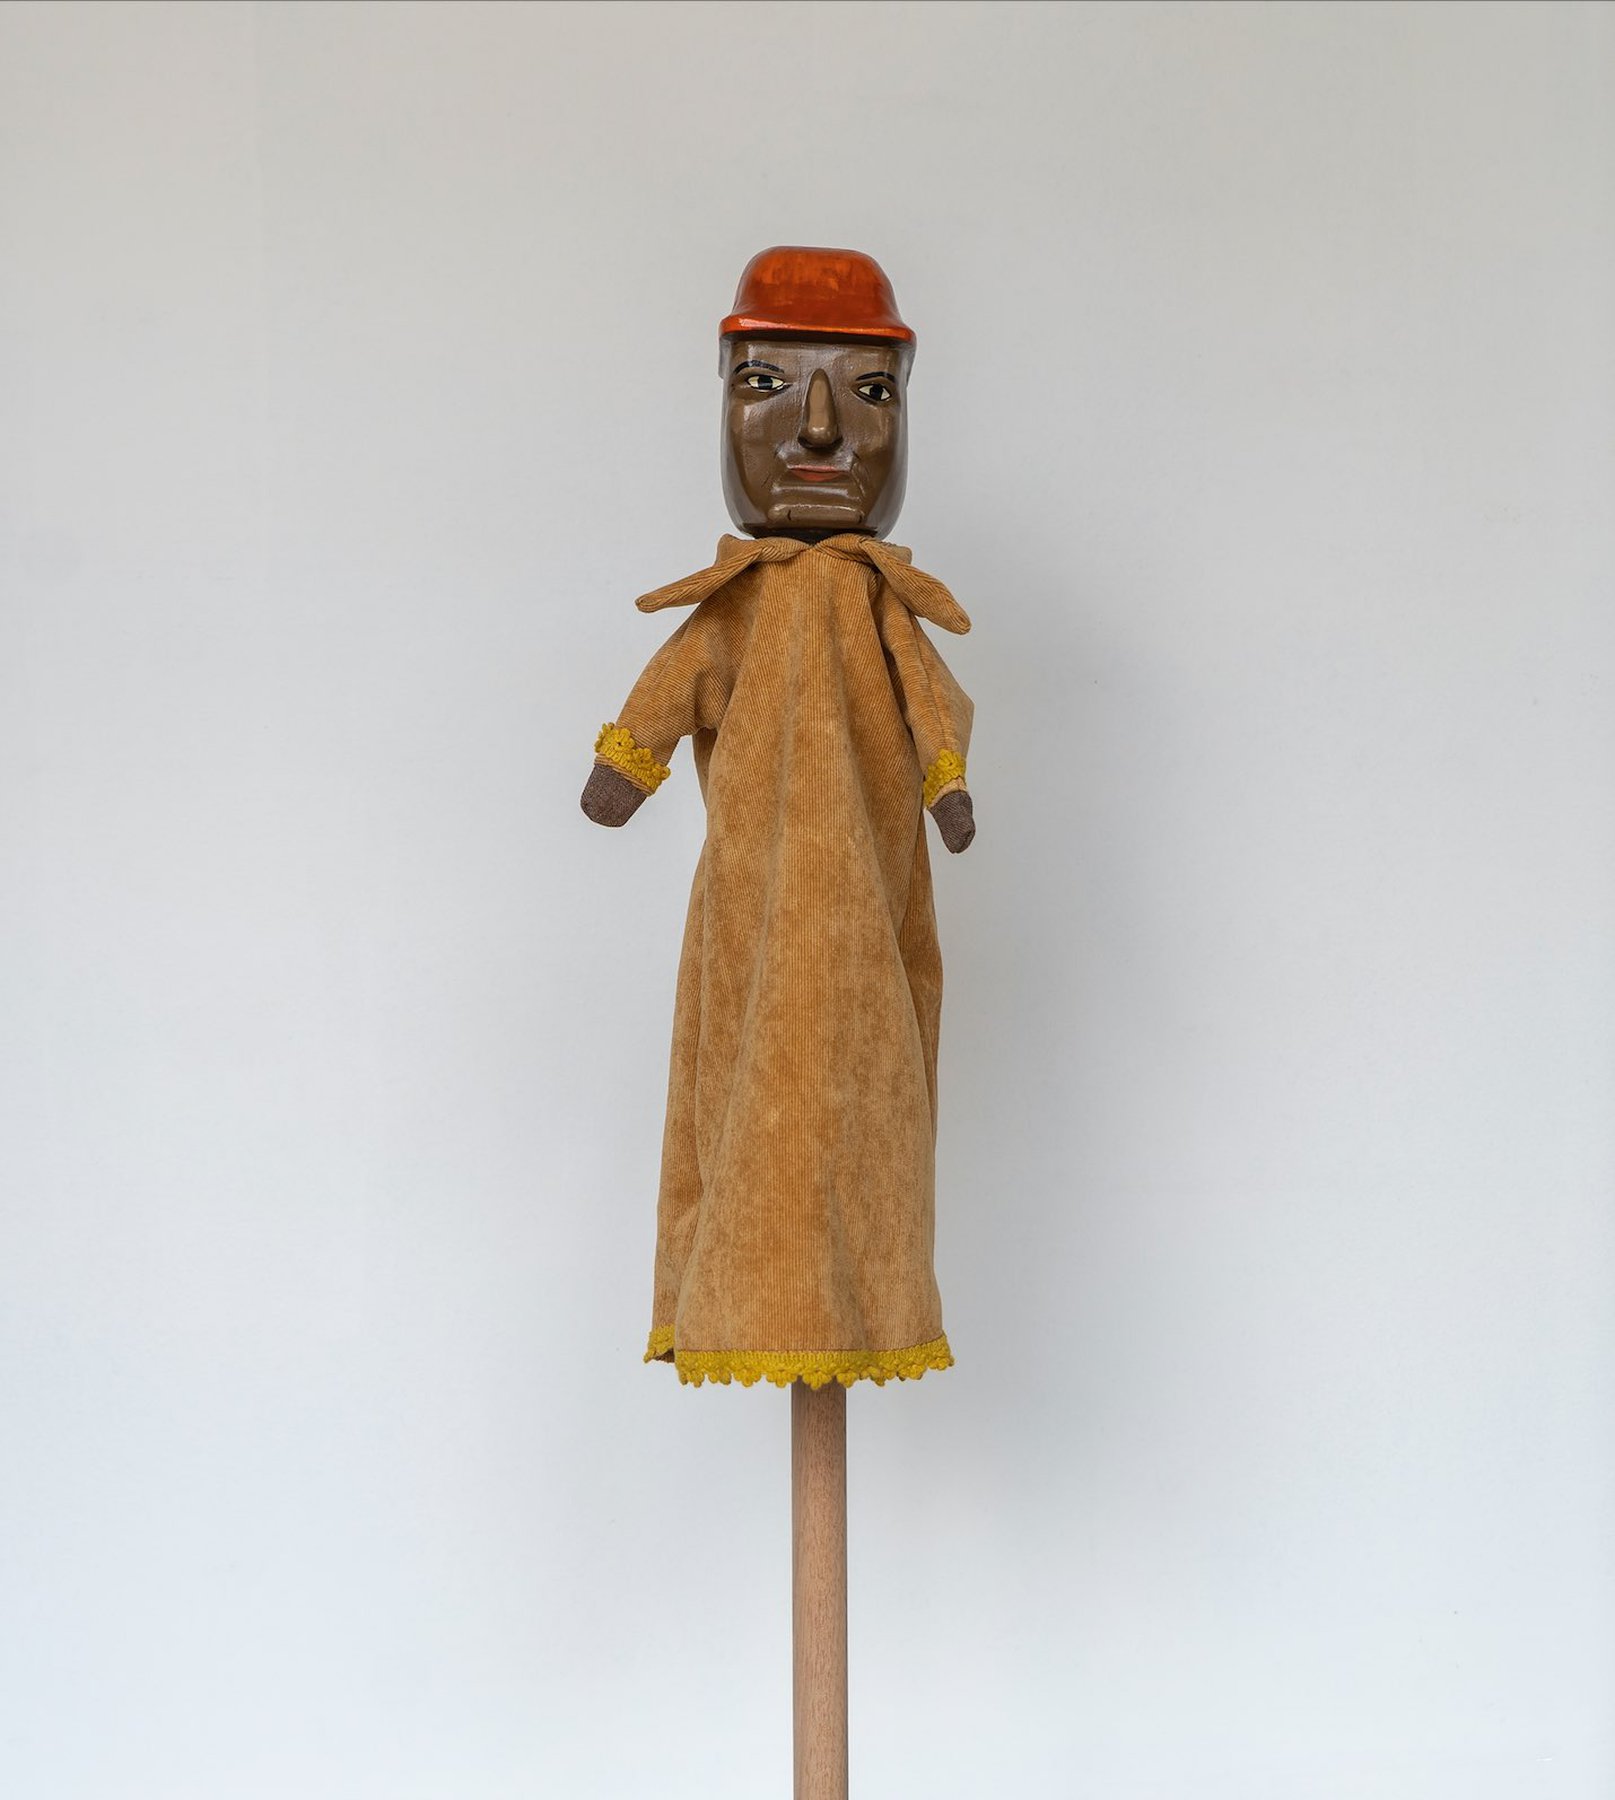 Daniela Ortiz, The Brightness of Greedy Europe, 2022, wood hand-carved, sewn, knitted and embroidered costumes (25 cm) puppet - Muqui